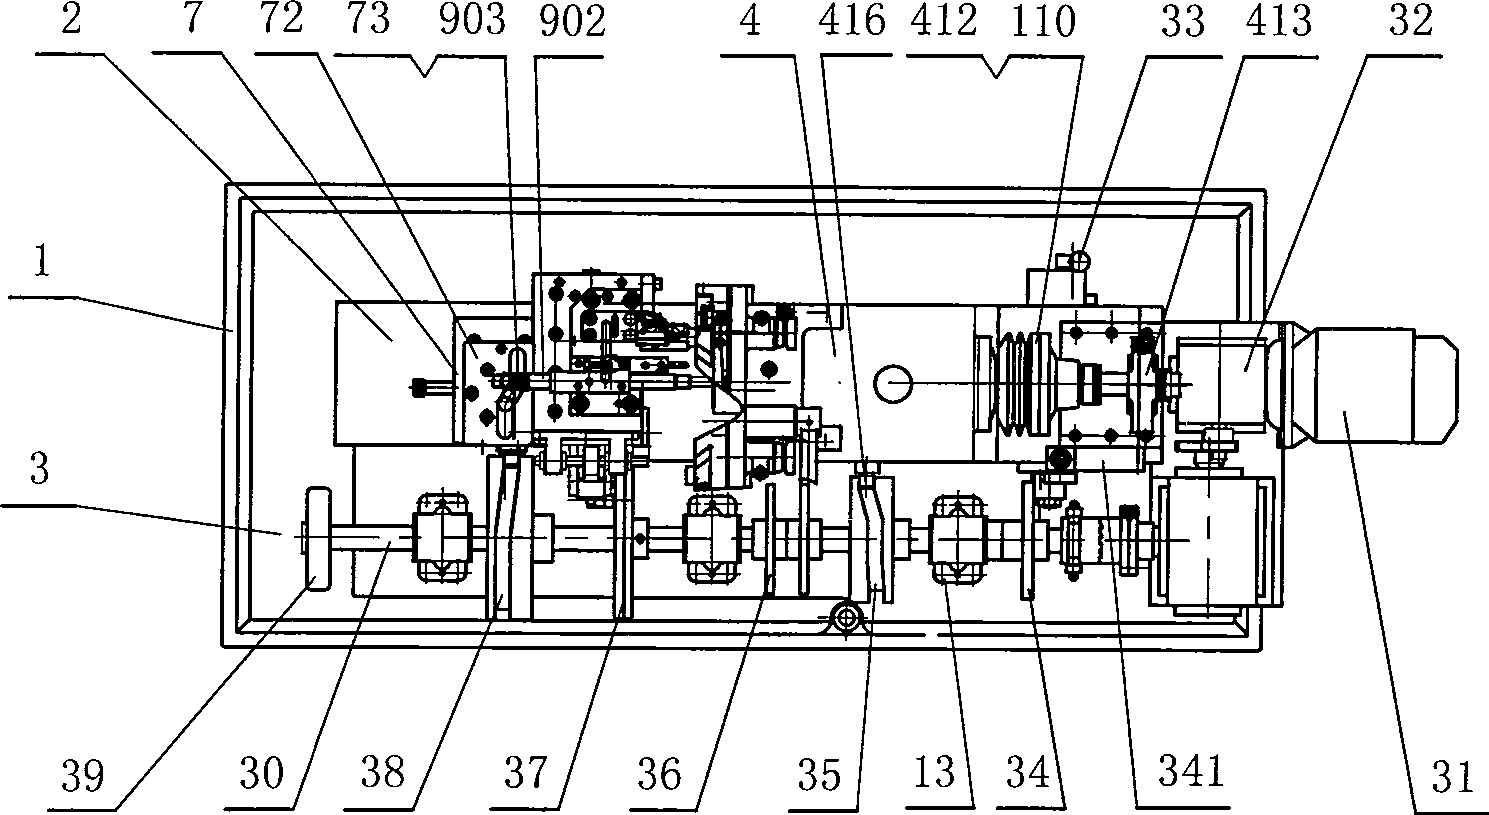 Single spindle automatic lathe for sequential operations by moving cutters along axes parallel to principal axis